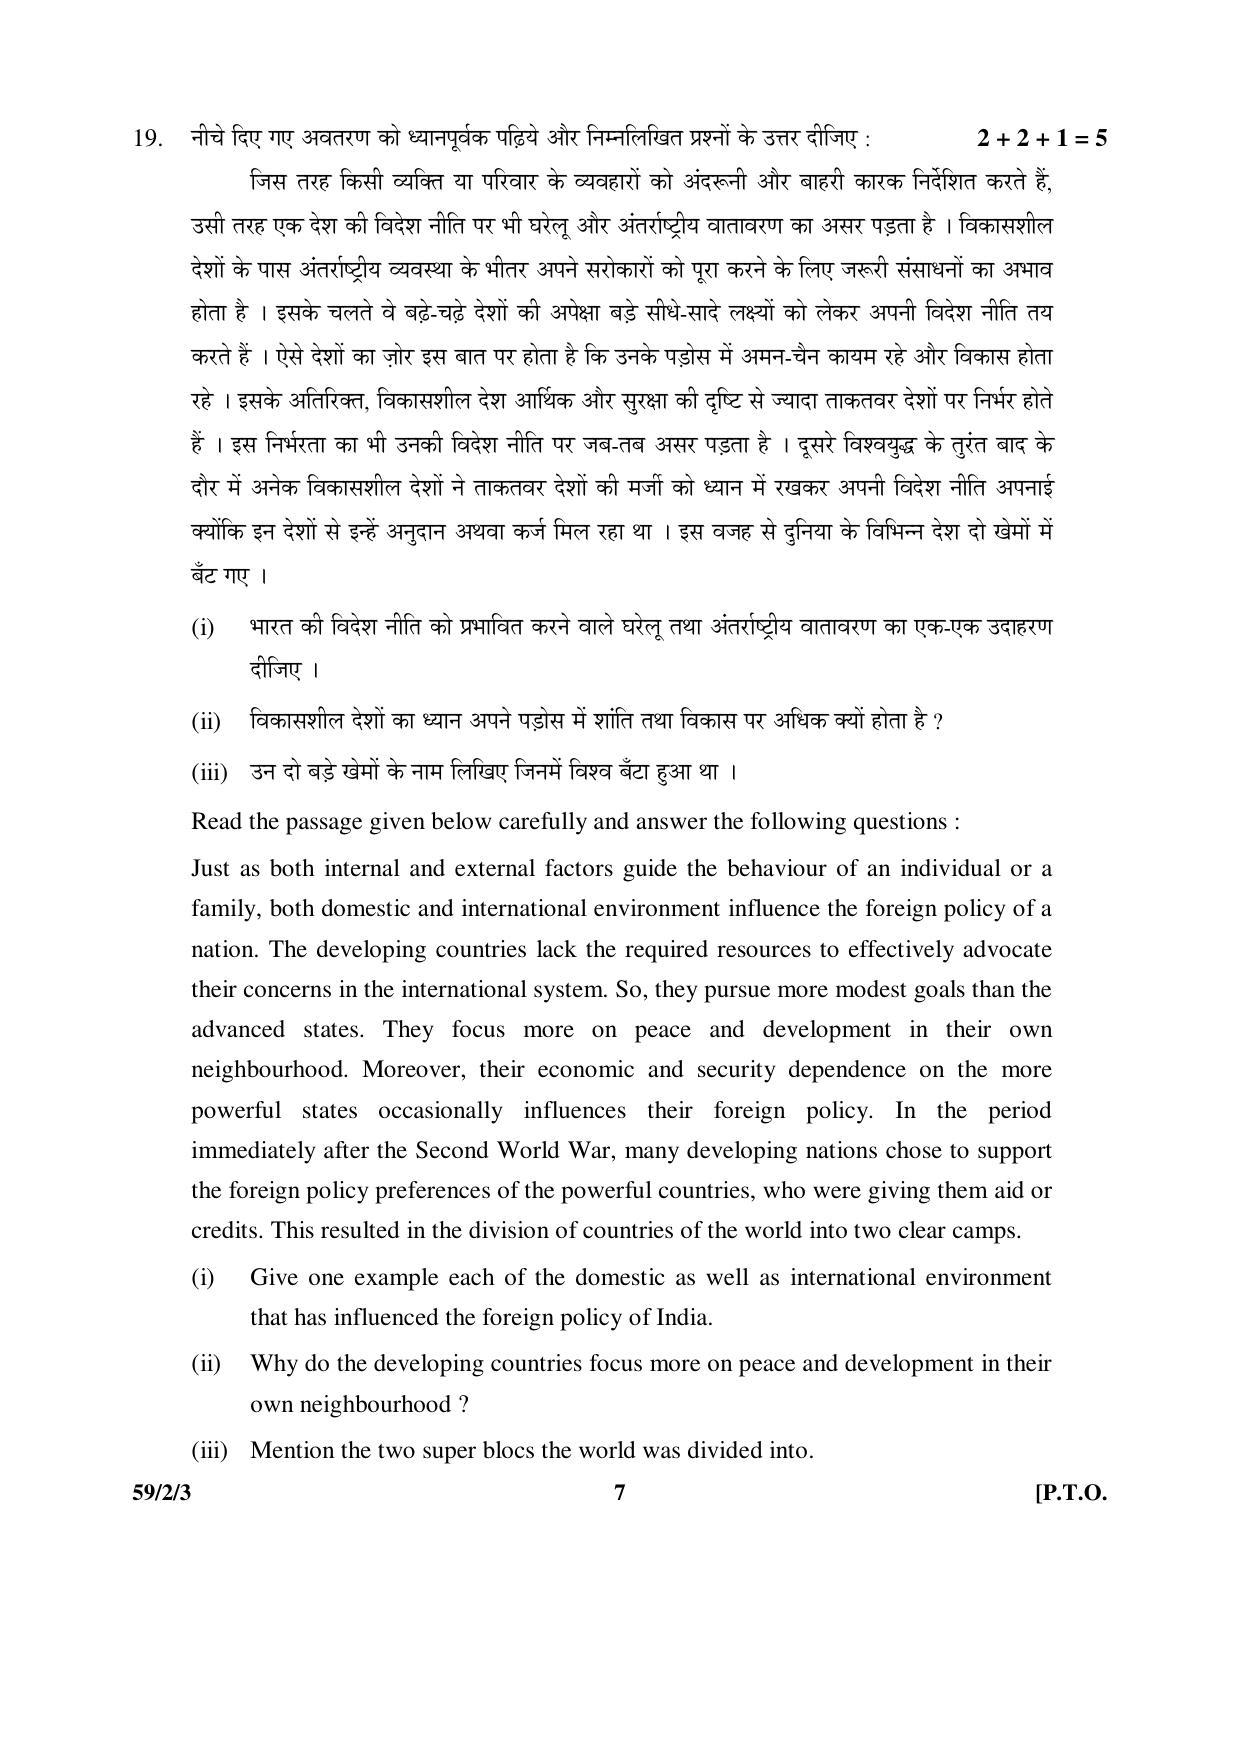 CBSE Class 12 59-2-3 _Political Science 2016 Question Paper - Page 7